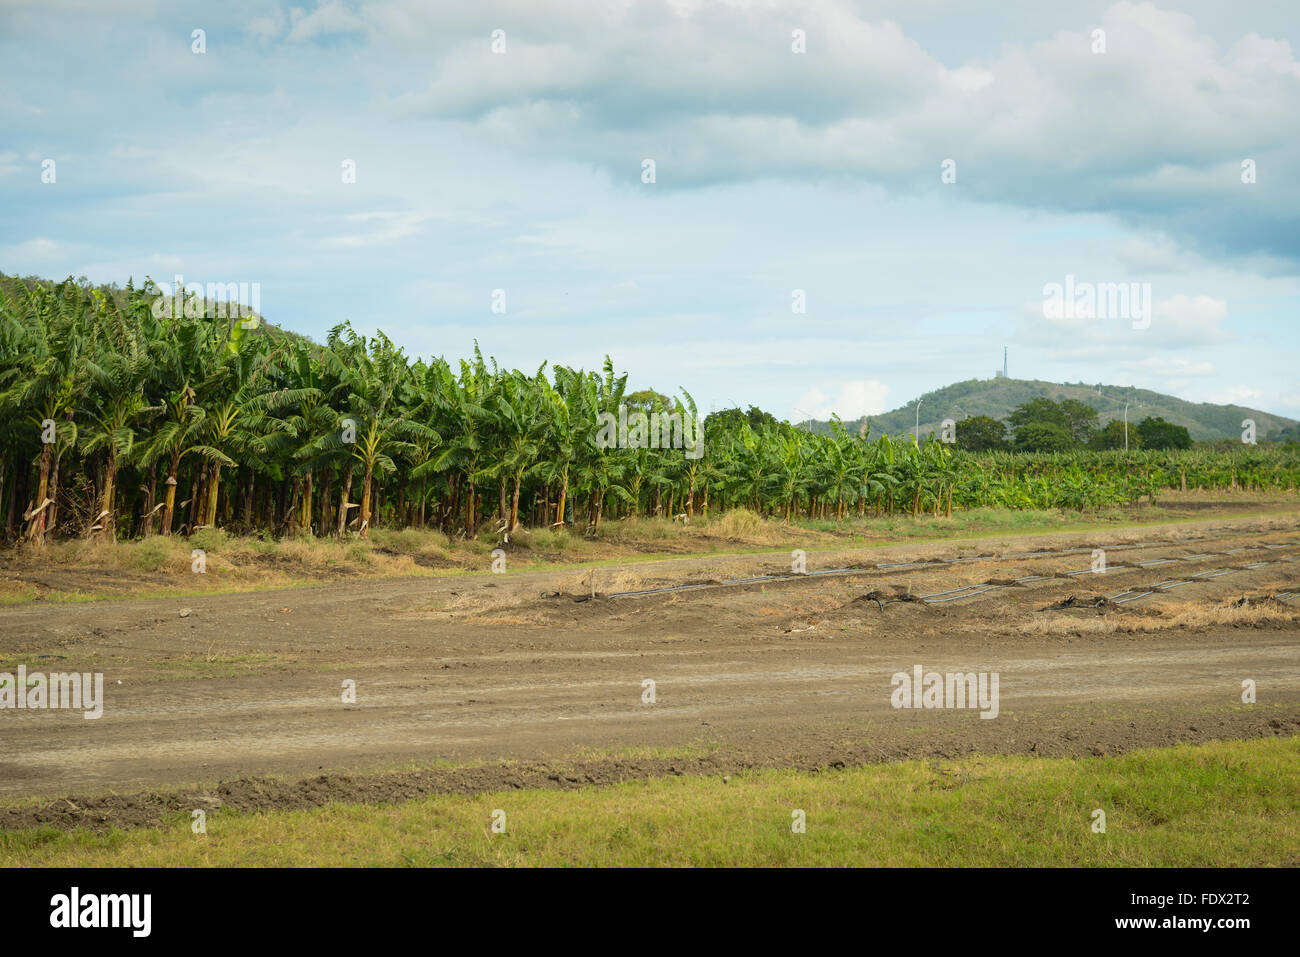 Banana plantations are one of the many agricultural activities in the island. PUERTO RICO - Caribbean Island. US territory. Stock Photo